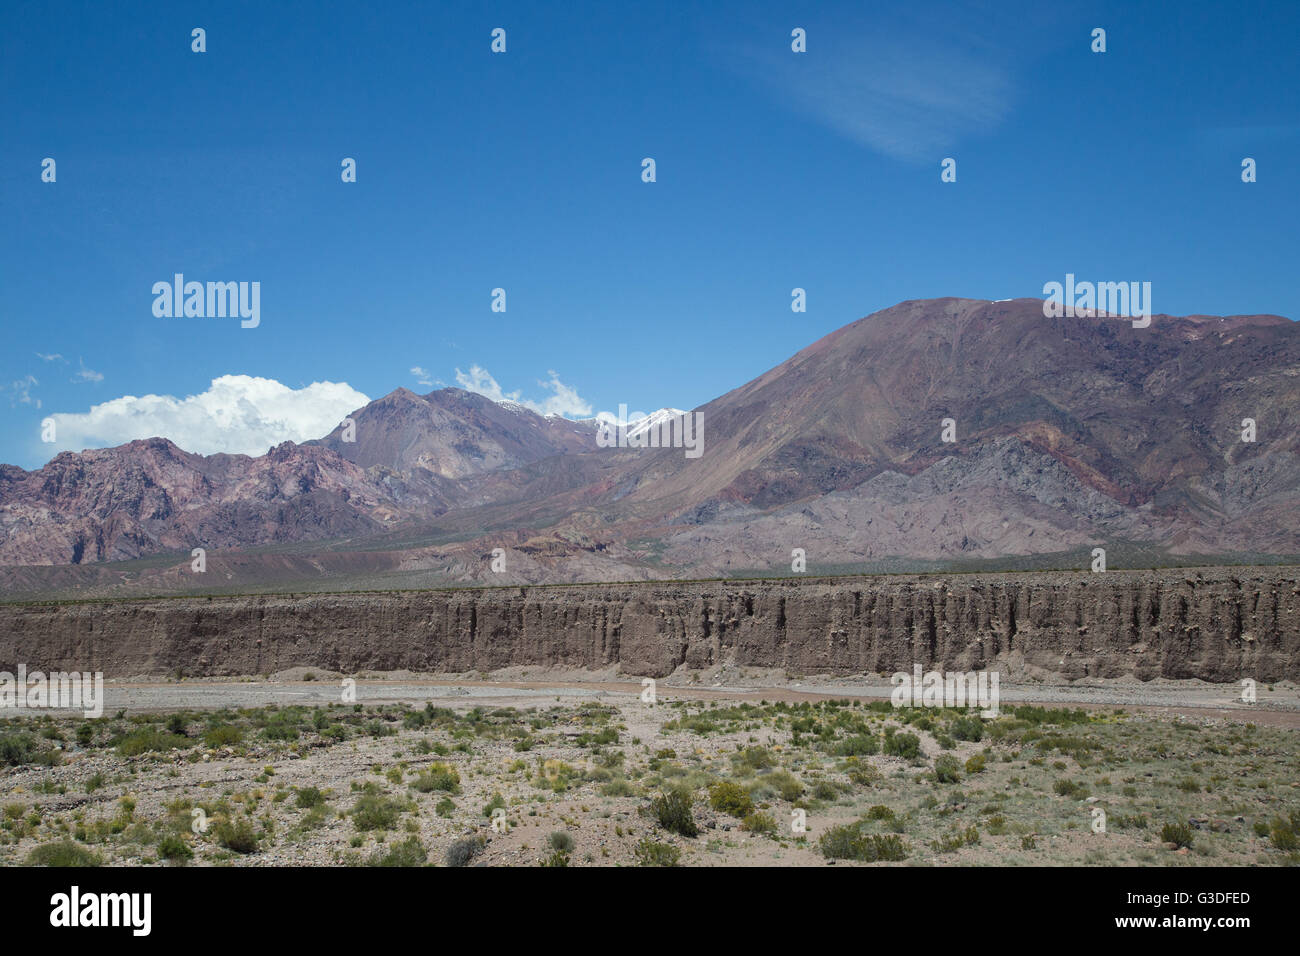 Landscape along National Route 7 through Andes moutain range close to the border in Argentina. Stock Photo